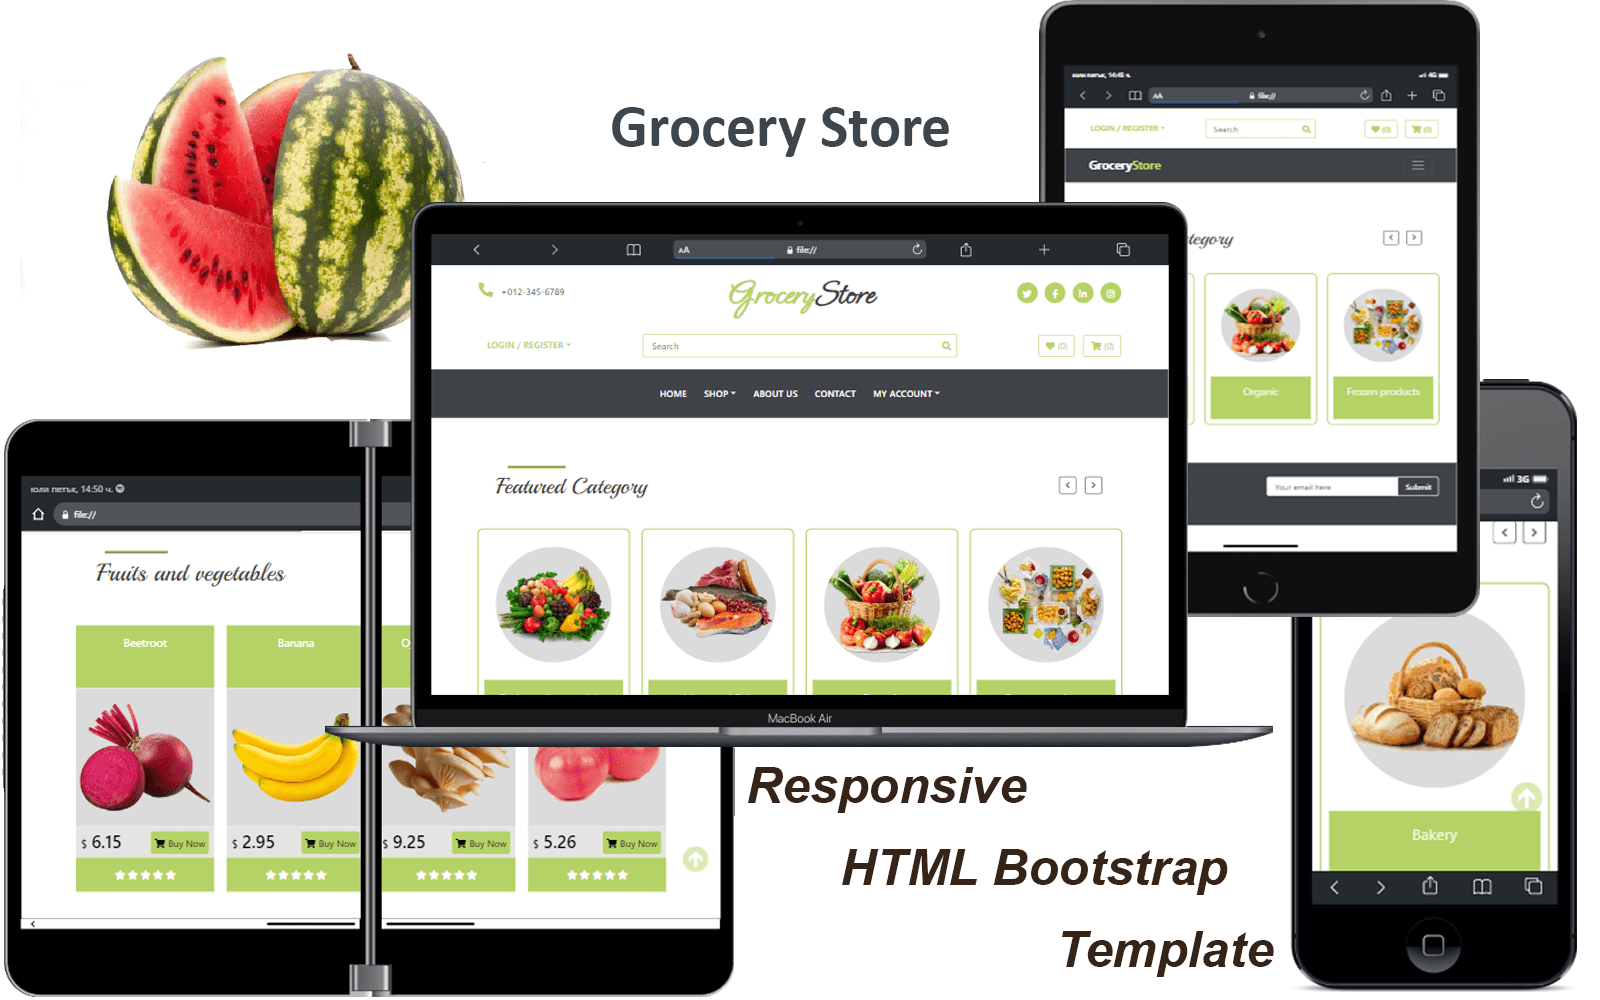 Grocery Store - Responsive HTML Bootstrap Template Website Template